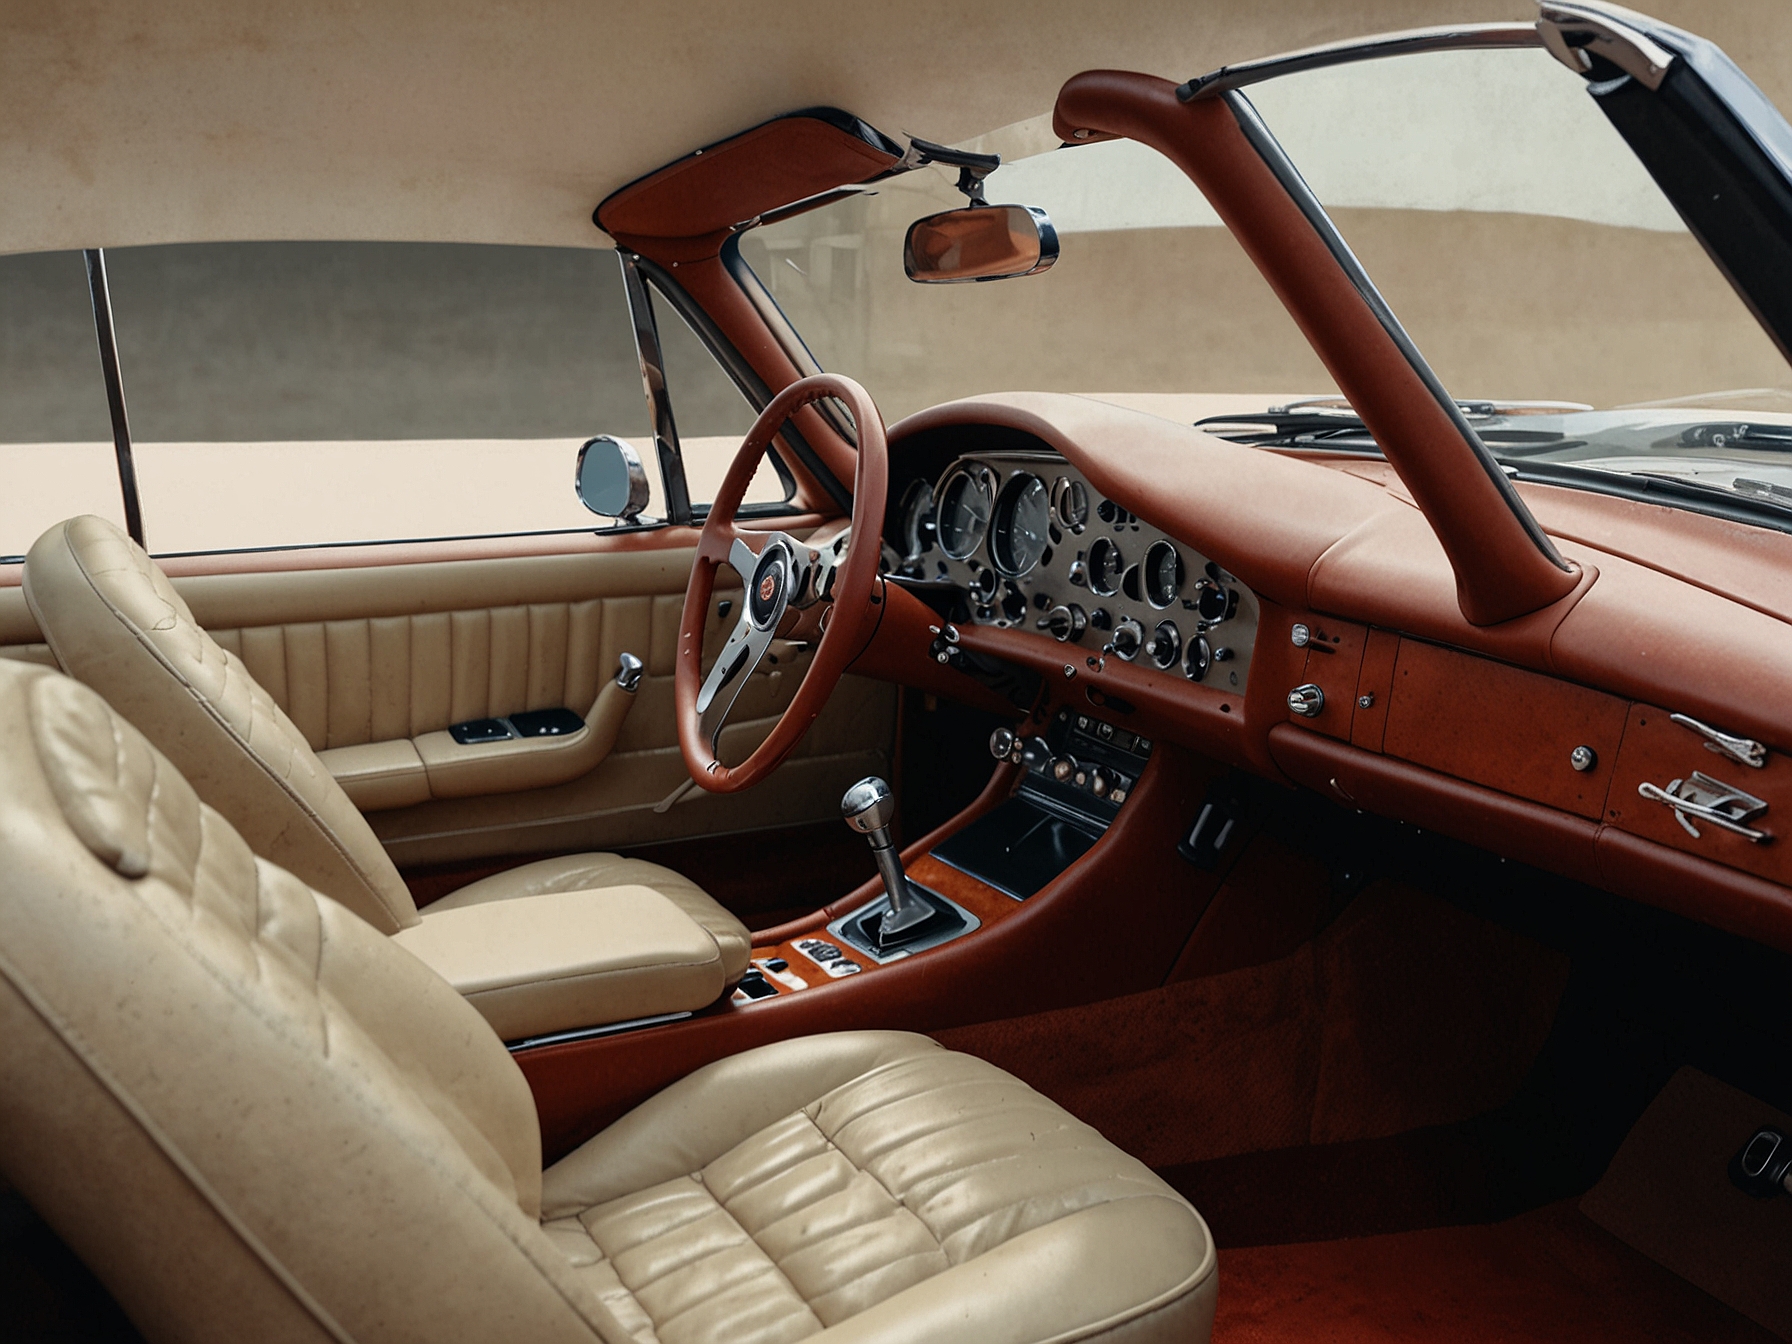 The interior of the 1964 Jaguar E-Type Low-Drag Coupe re-creation, featuring faithfully restored leather seats, classic dials, and switches on the dashboard, offering a luxurious and authentic driving experience.